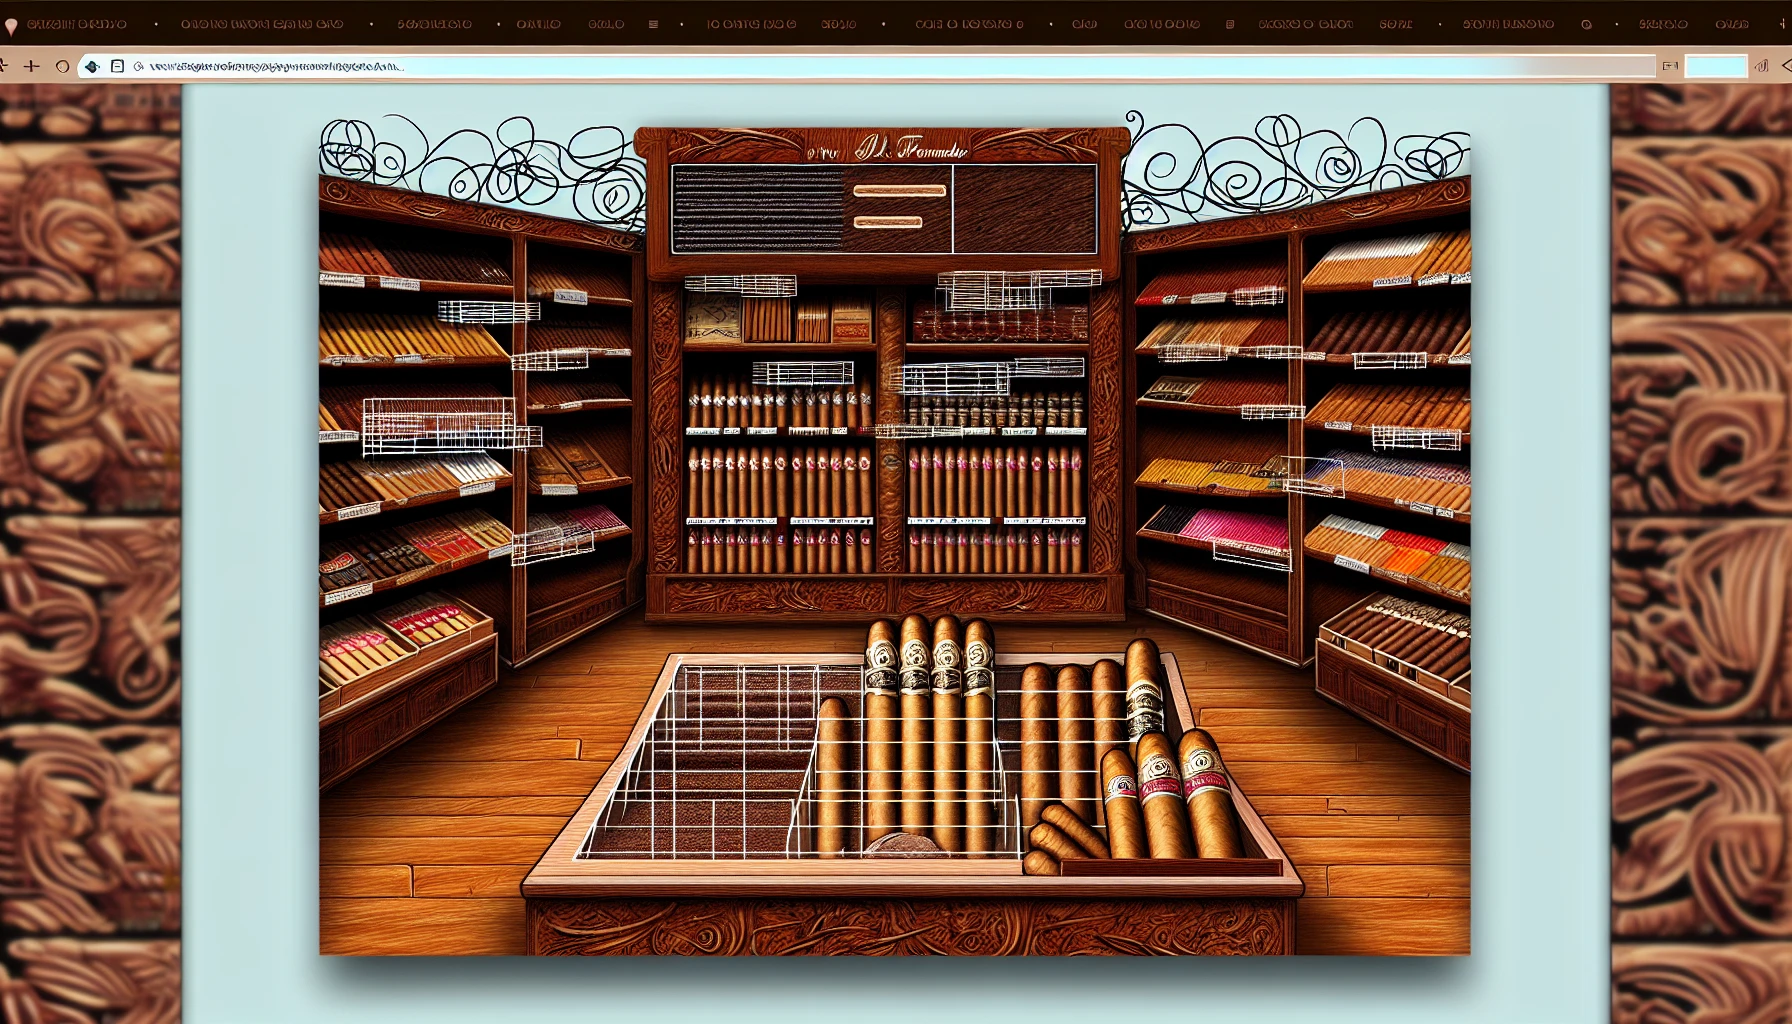 Online cigar store with a variety of premium cigar brands including the A.J. Fernandez New World